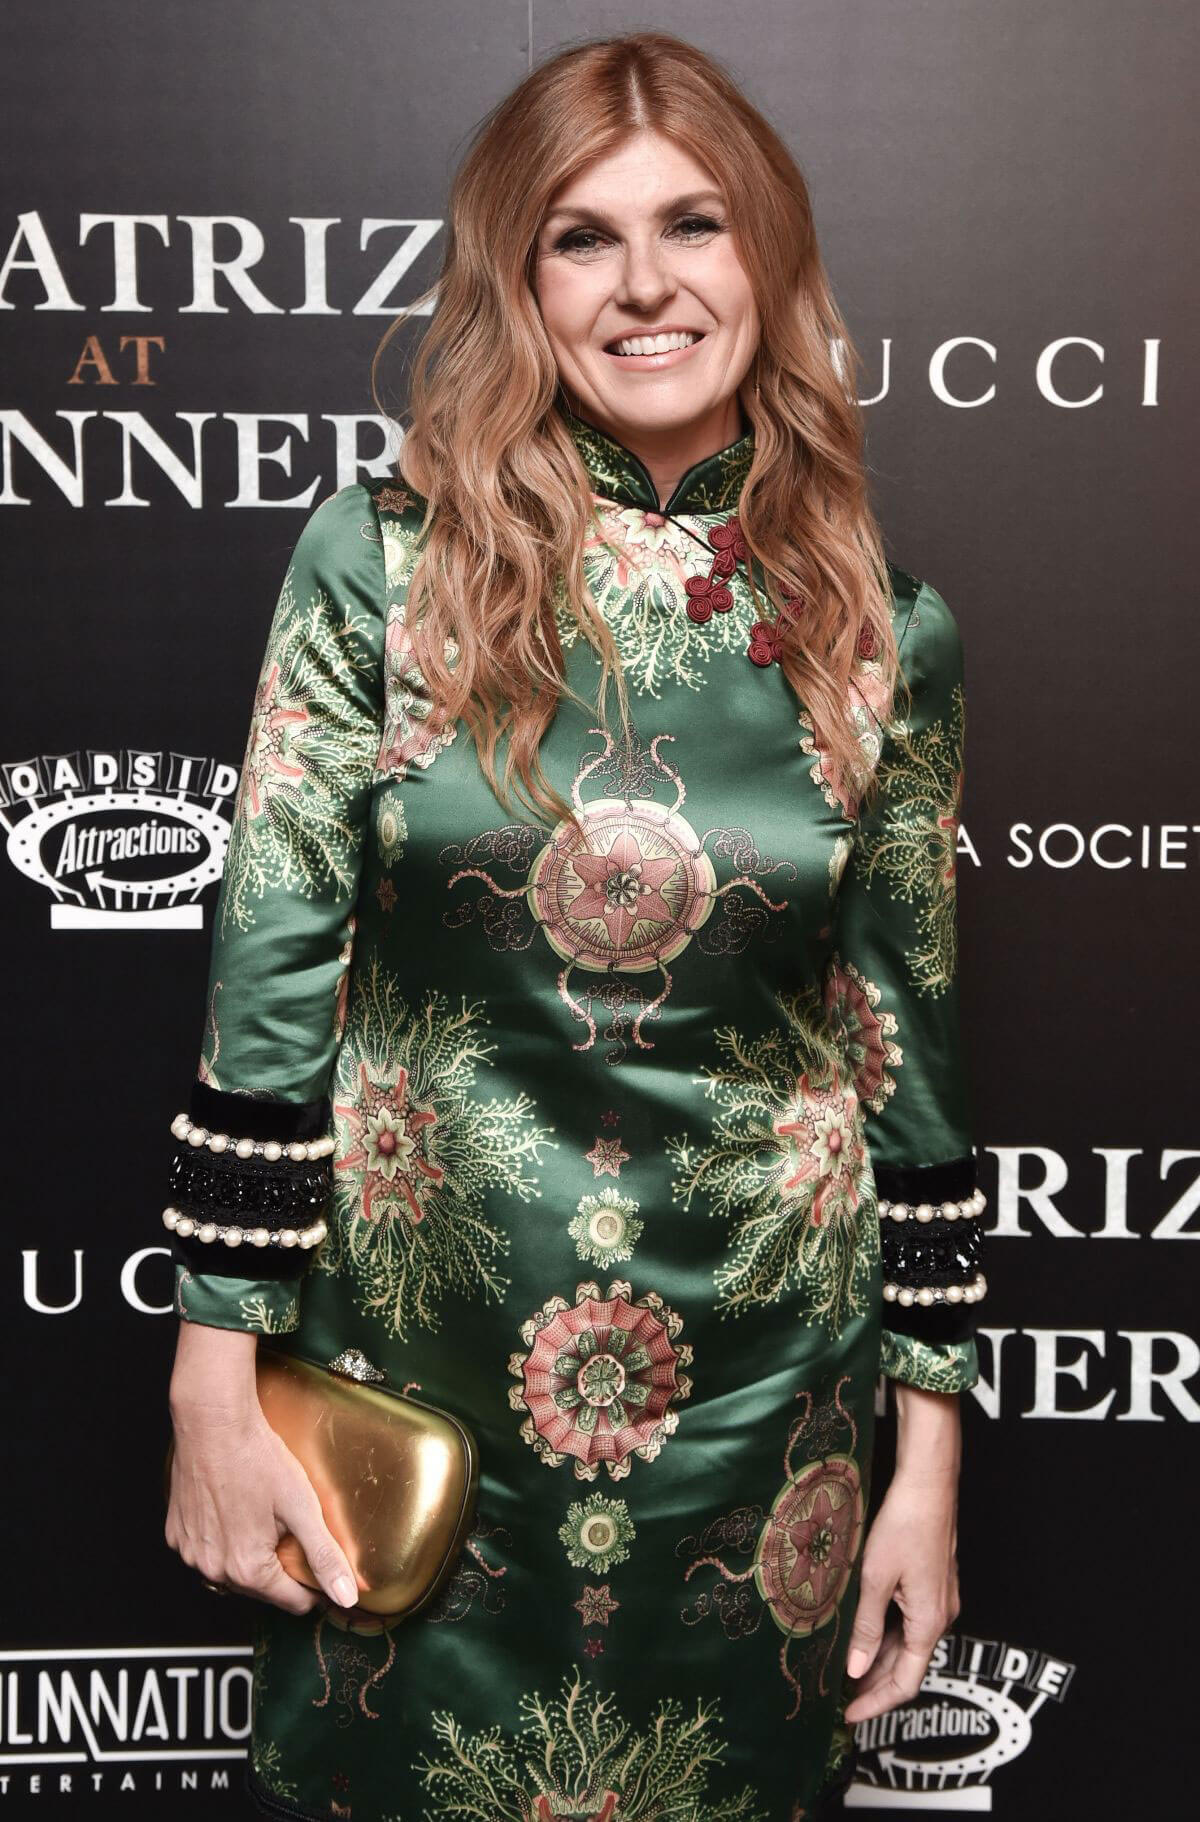 Connie Britton at Beatriz at Dinner Screening in New York